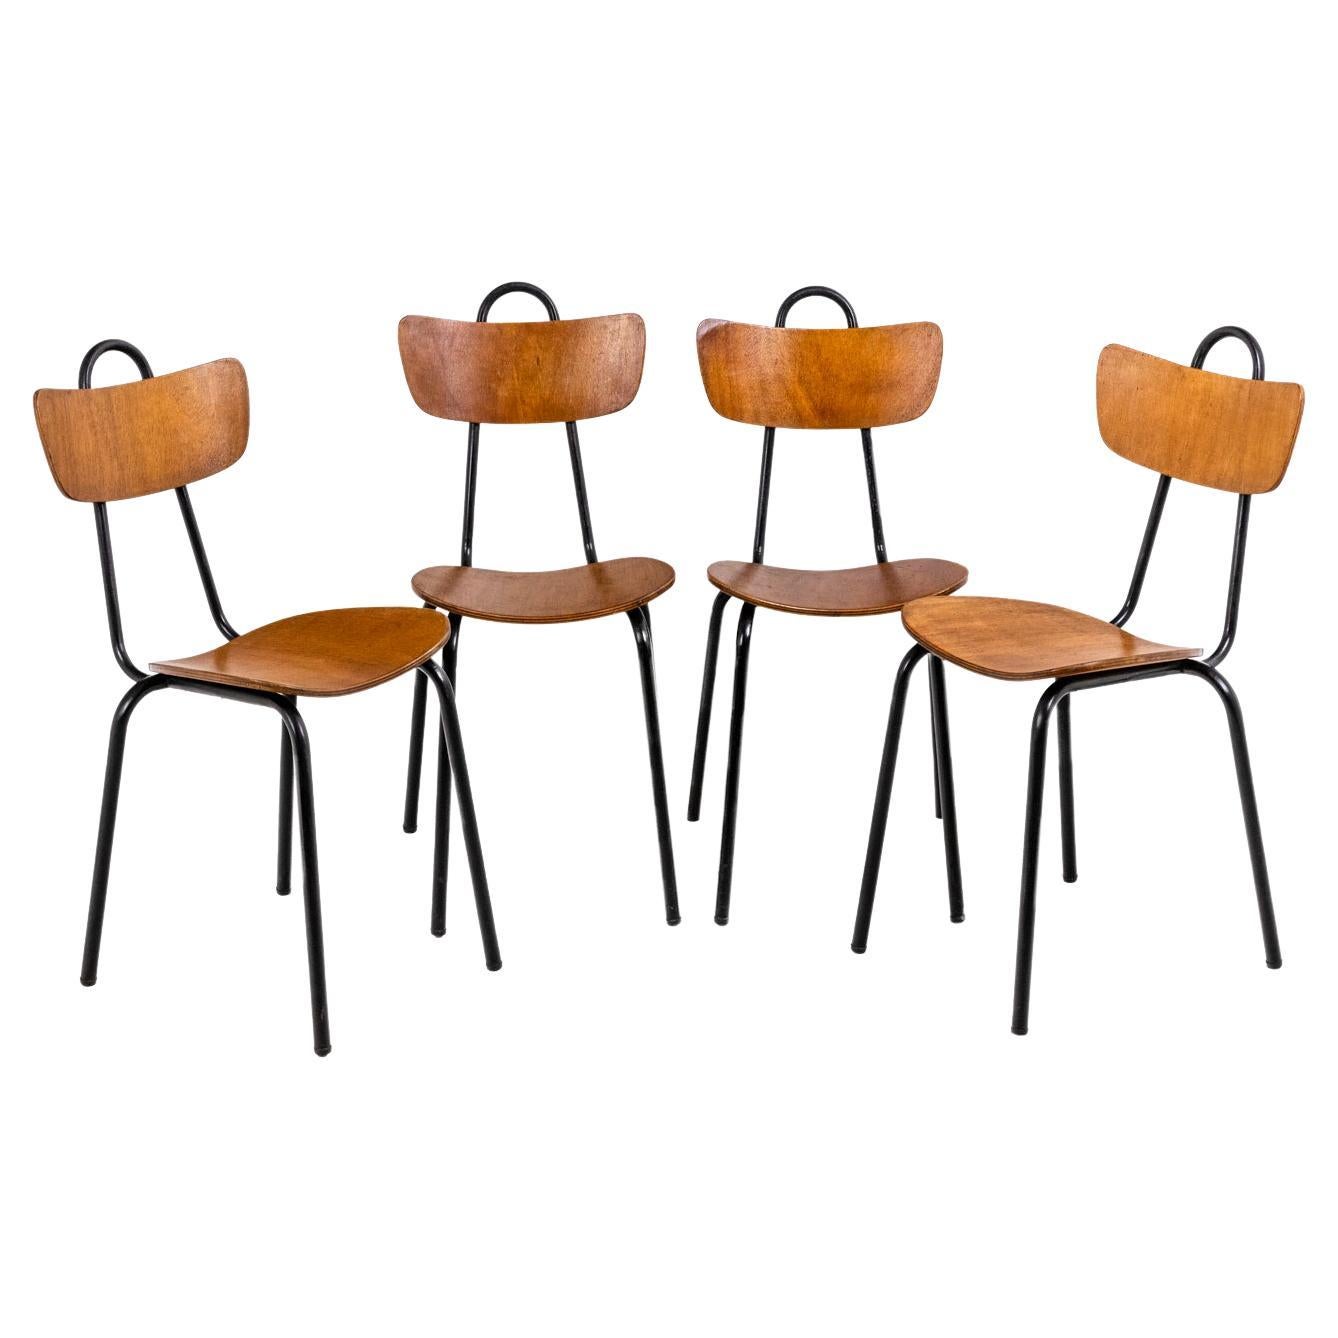 Series of Four Chairs in Wood and Metal, 1950s